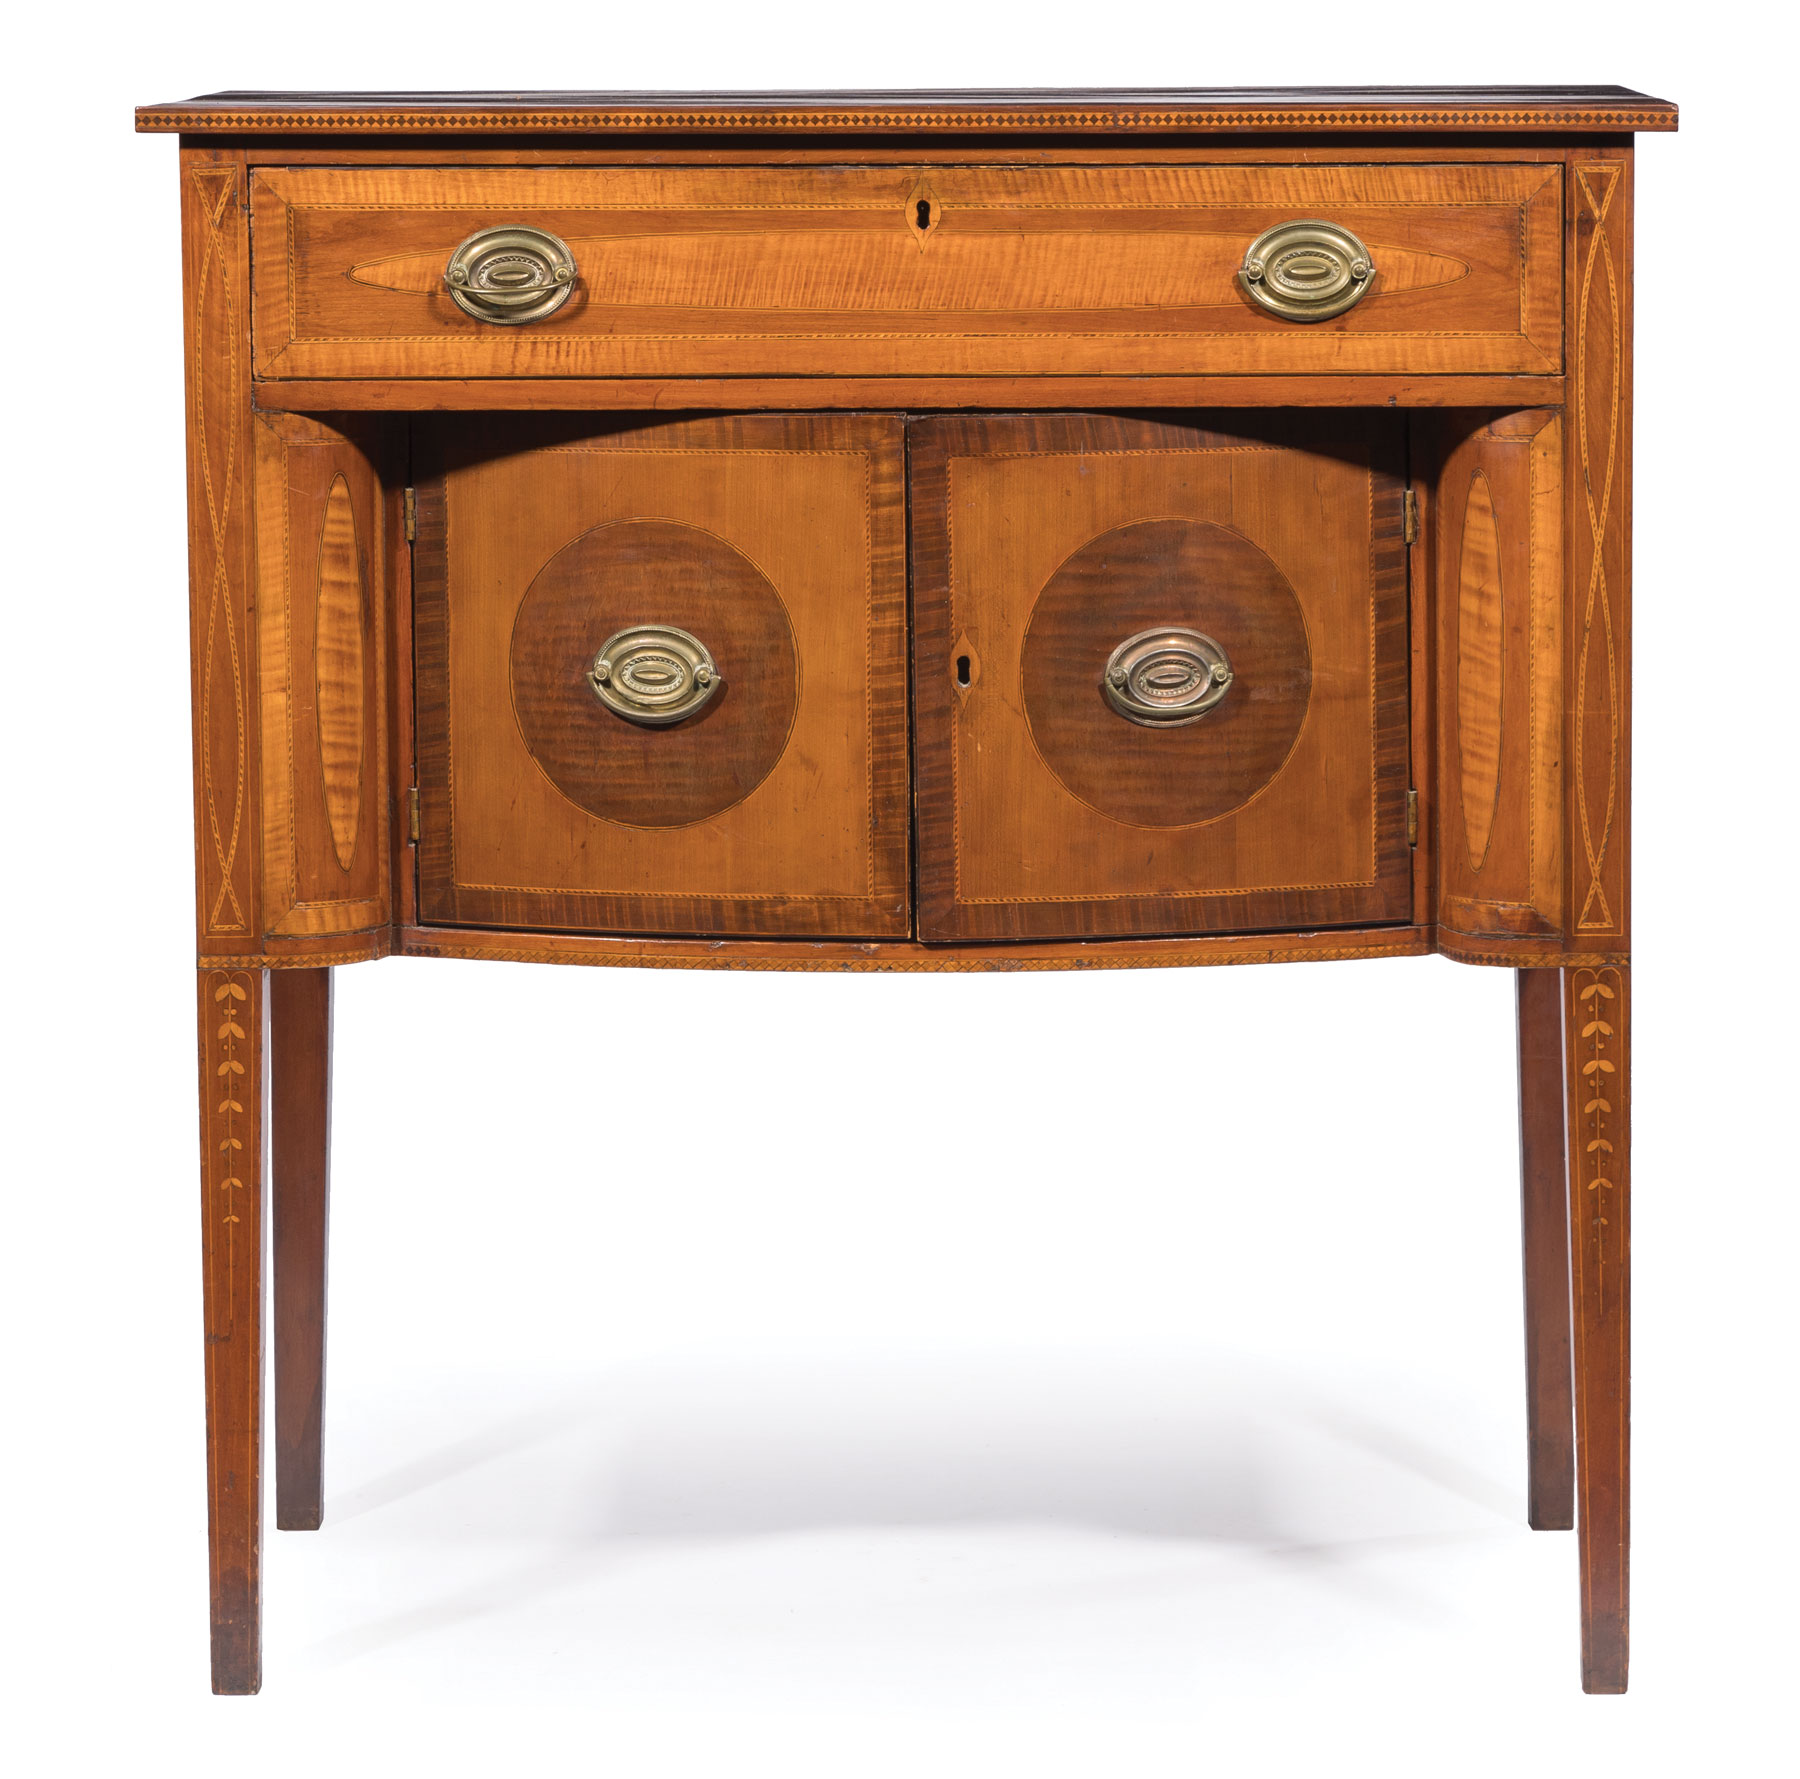 Federal Inlaid Mahogany, Cherrywood and Tiger Maple Server , late 18th/early 19th c., probably New - Image 2 of 2